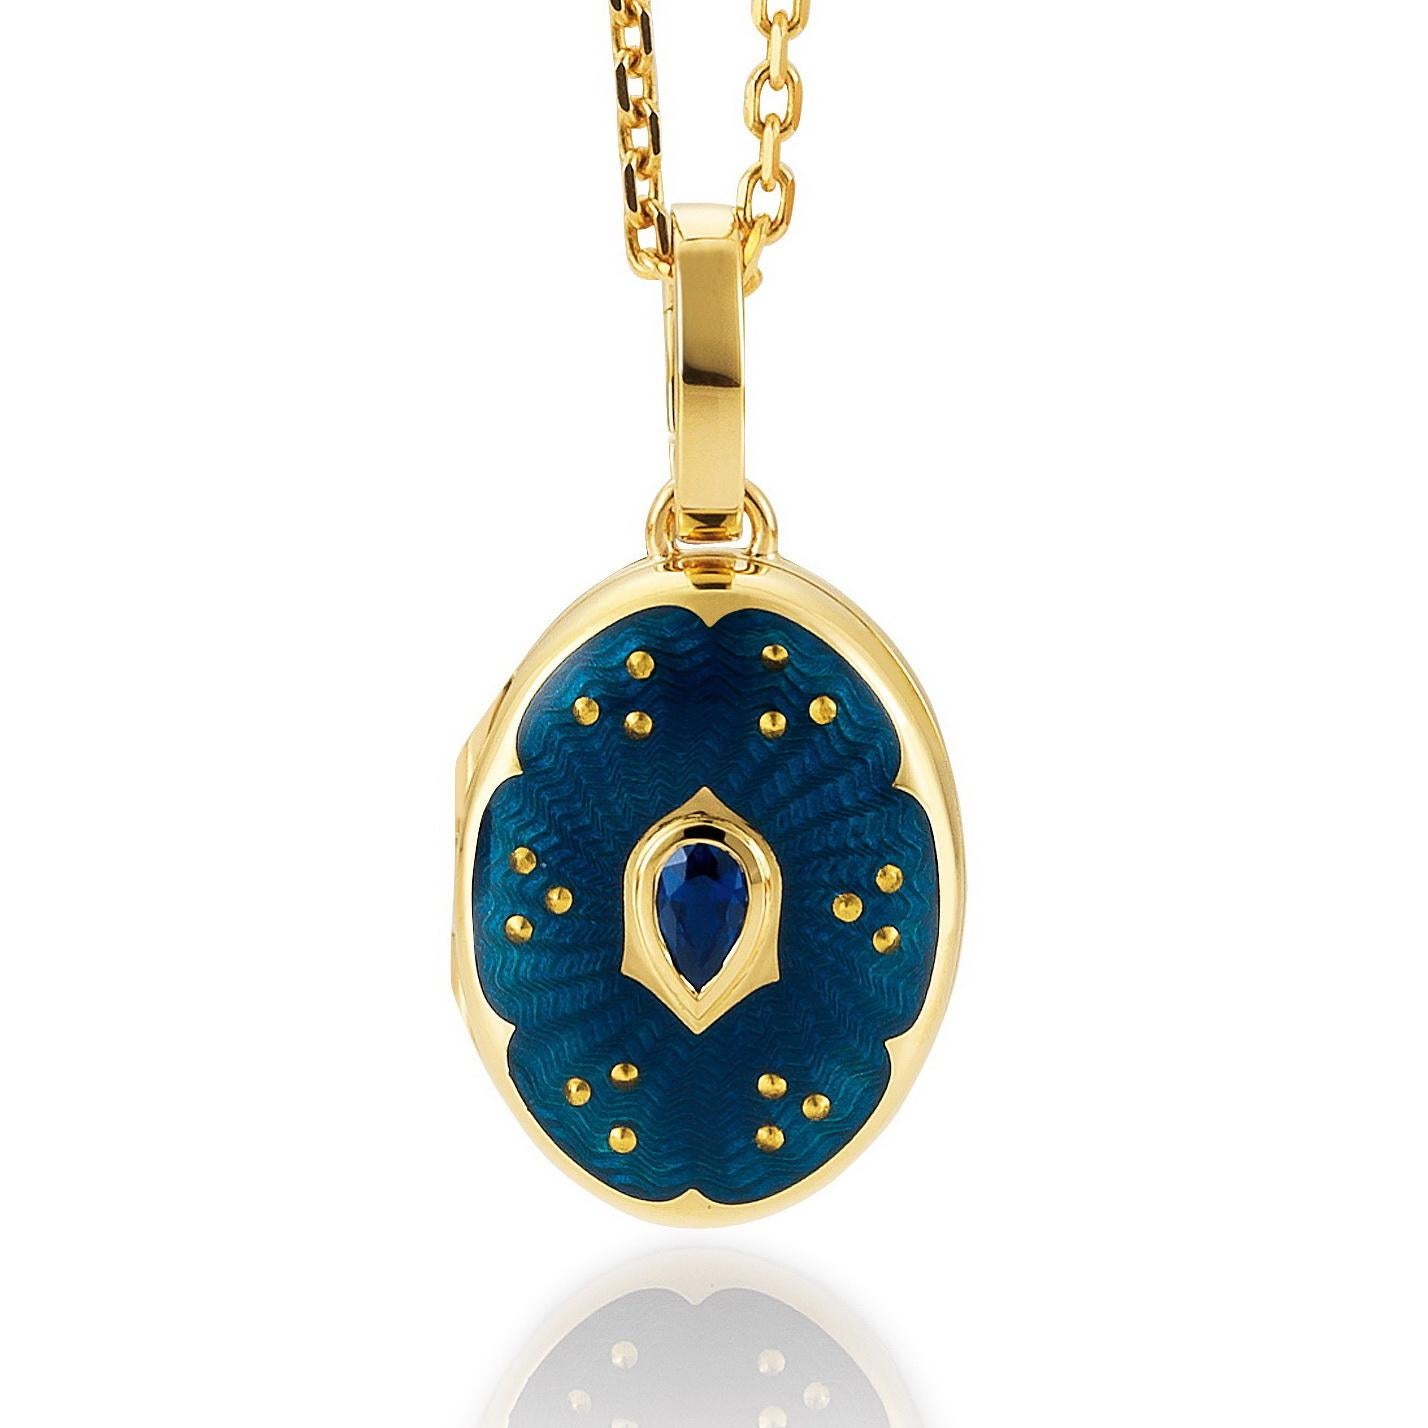  Oval Locket Pendant - 18k Yellow Gold - Blue Enamel with Paillons - 1 Sapphire For Sale